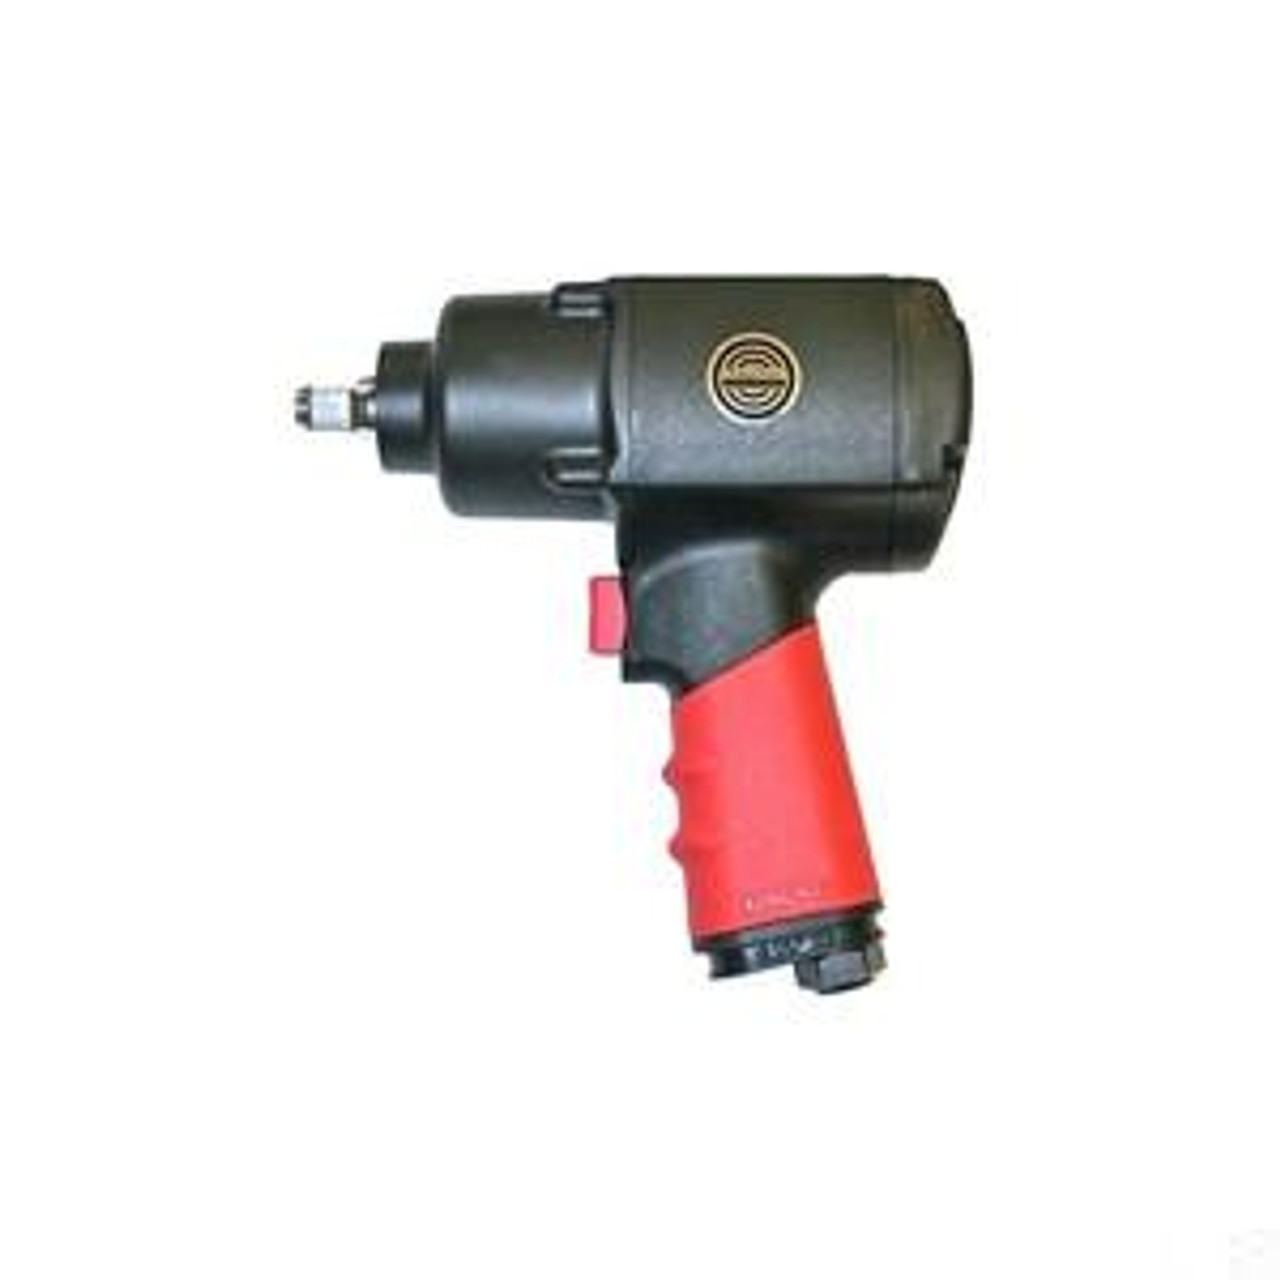 1/2" SD Impact Wrench 1000 ft.lbs. Torque, T-8849